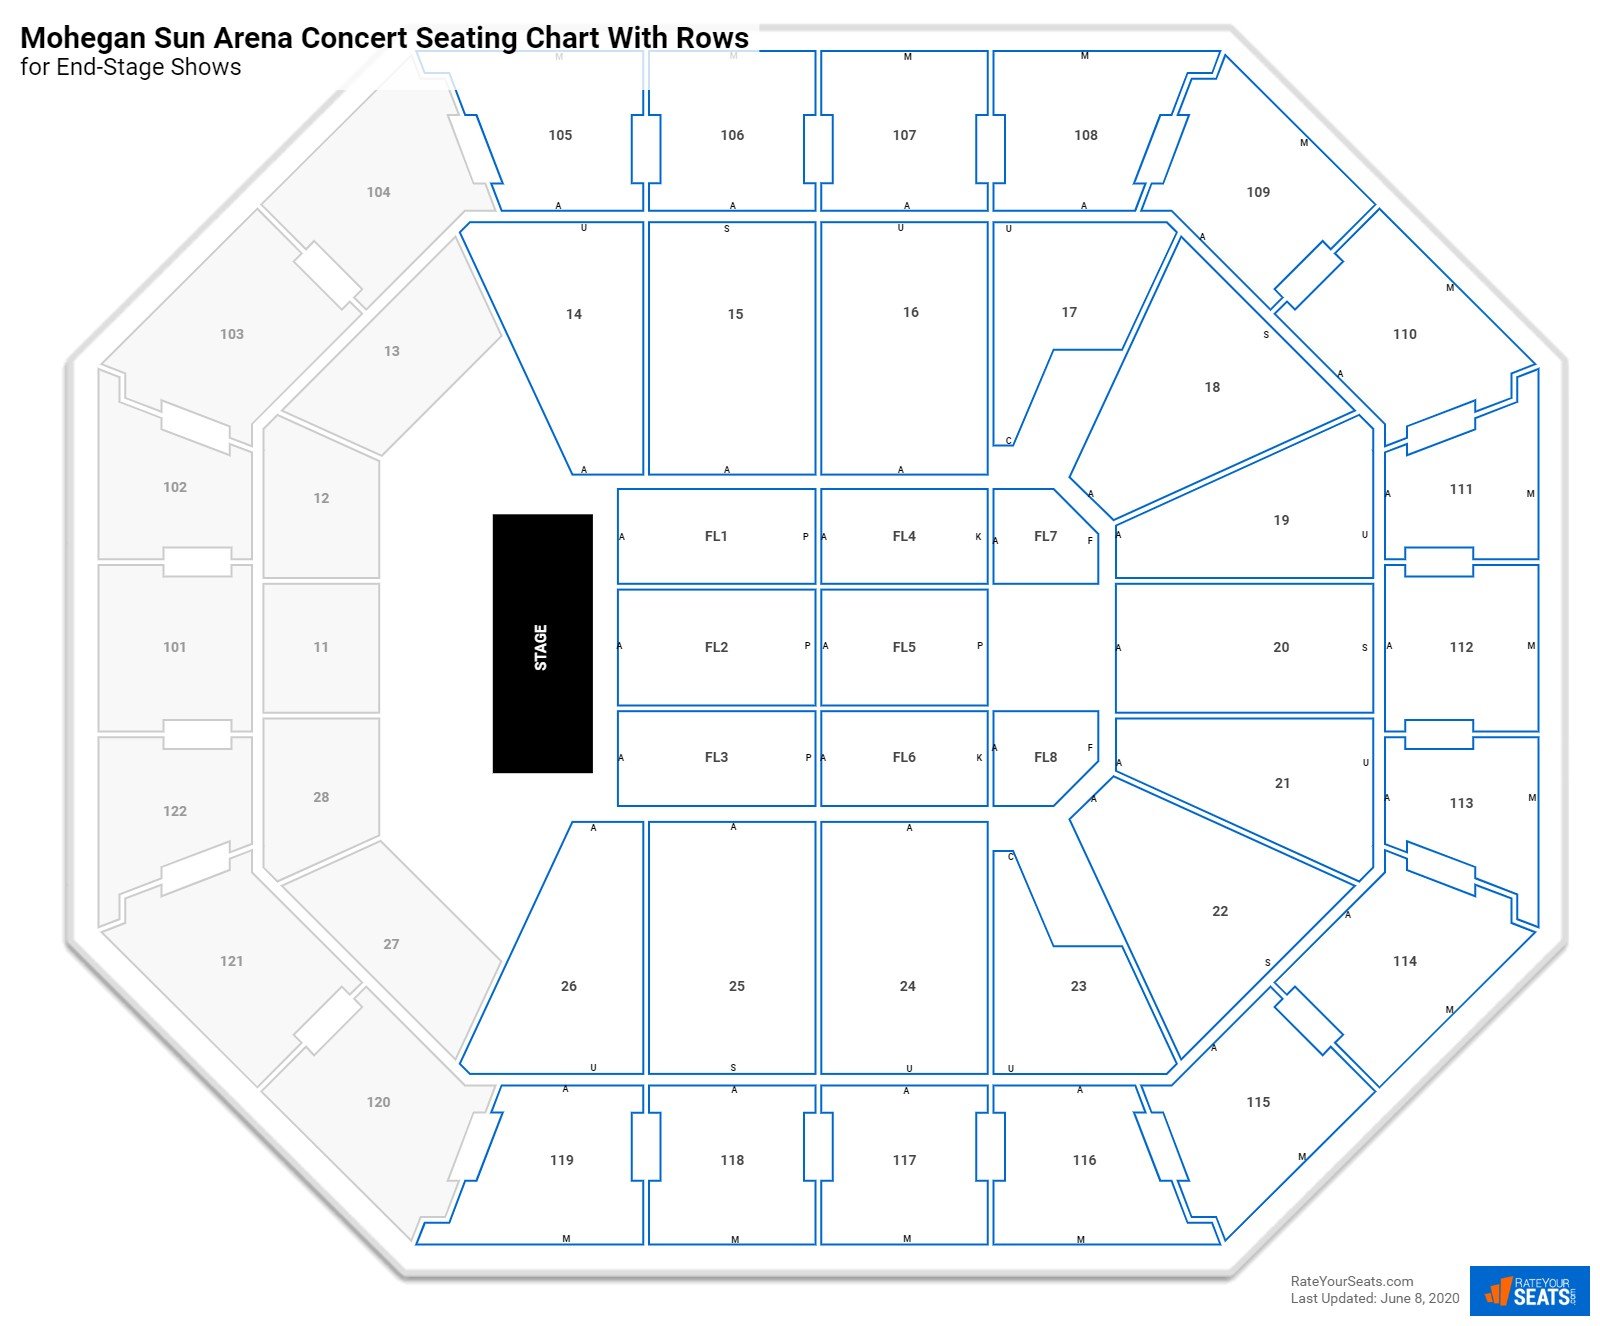 Mohegan Sun Arena seating chart with row numbers